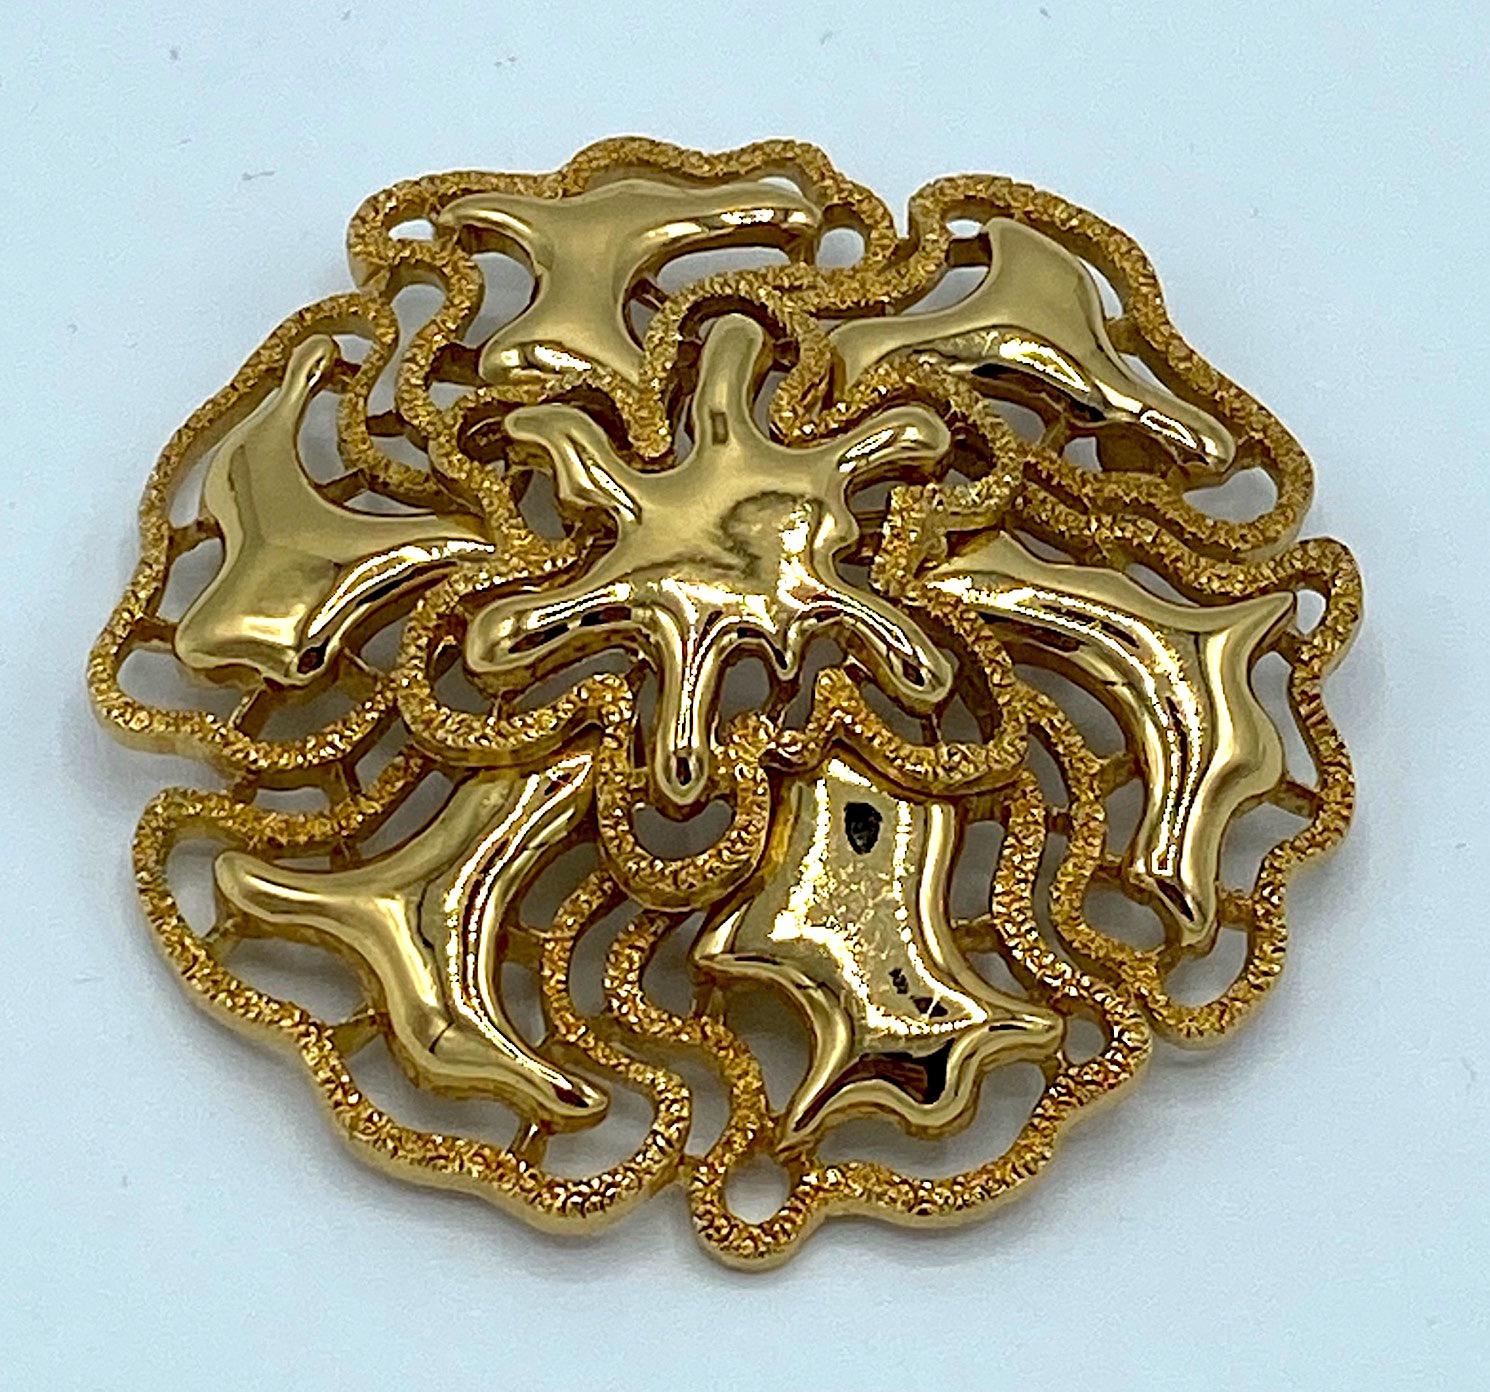 A lovely brooch from the 1974 Mandira collection by well known American fashion jewelry company Monet. It features a polished and textures gold plate finish on the abstract design. The brooch is lightly domed measuring 2.5 inches in diameter .5 of